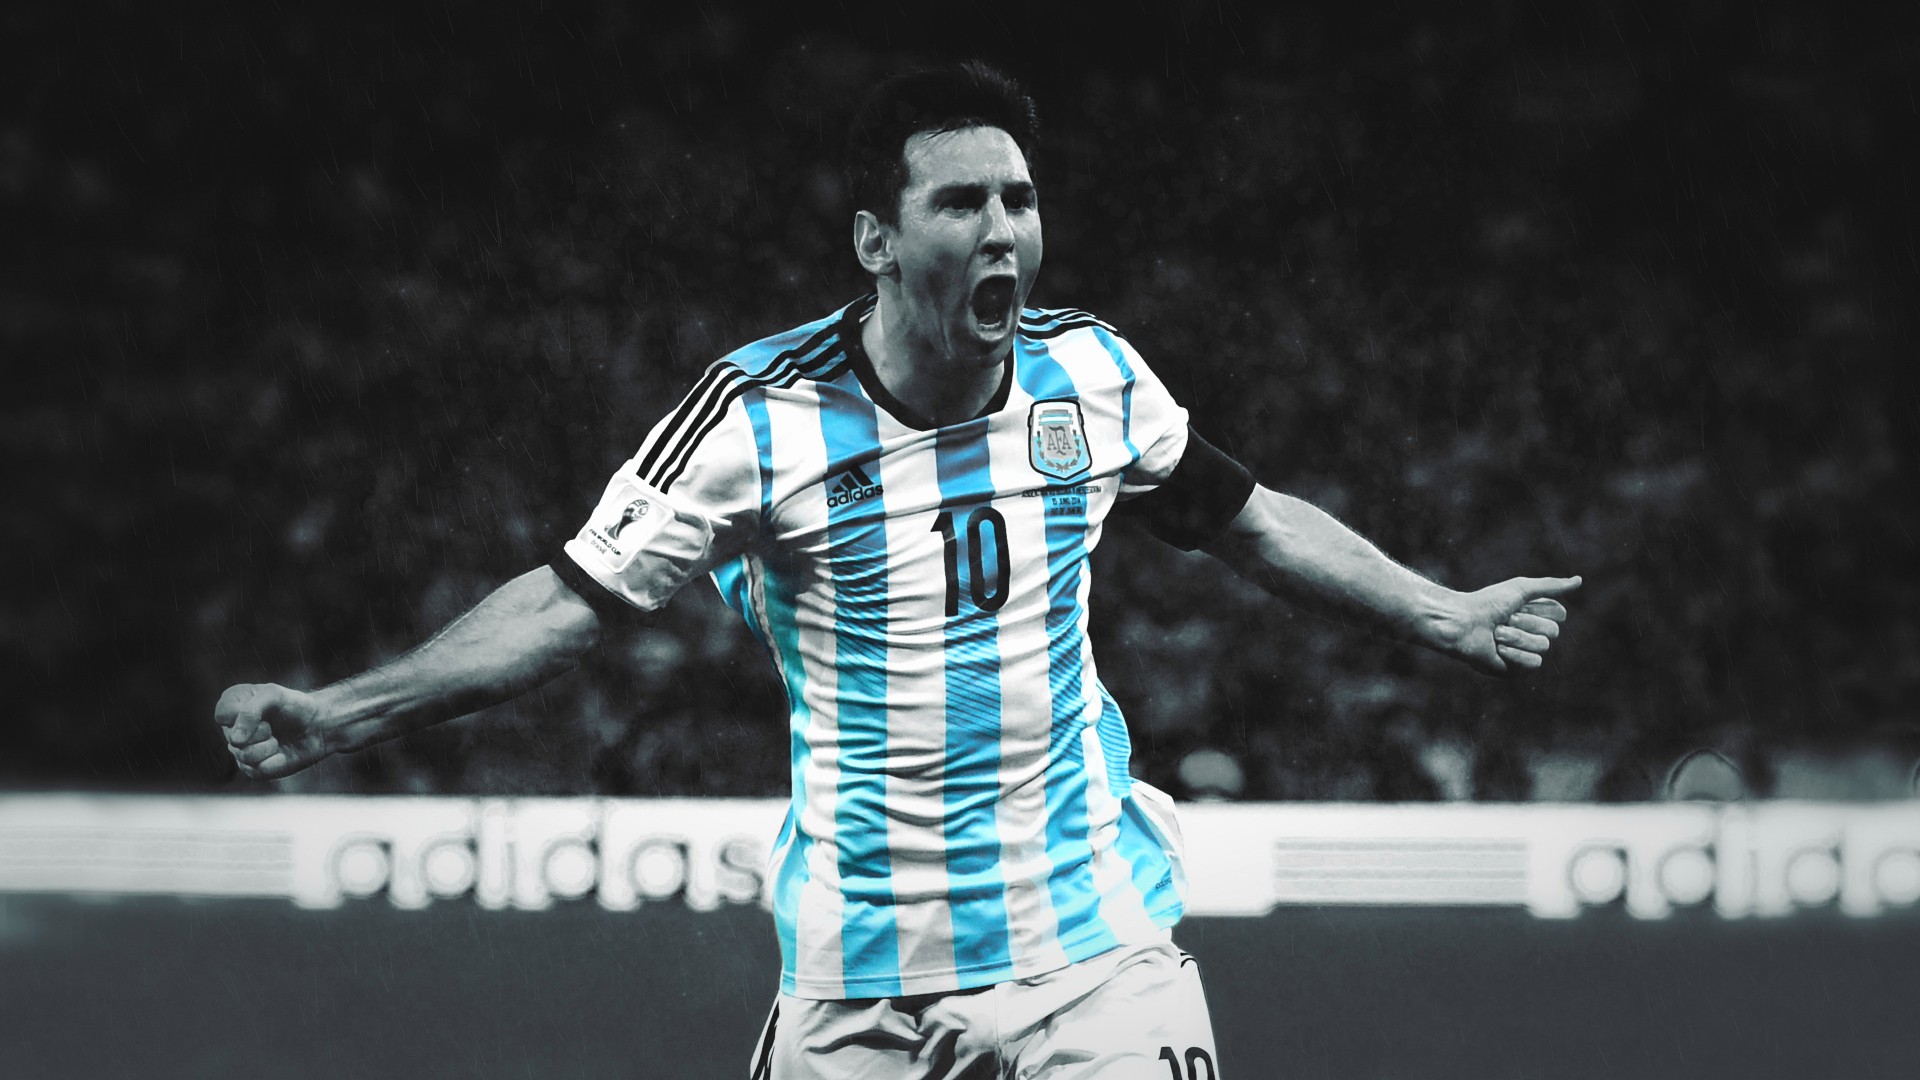 People 1920x1080 Argentina men Argentinian blue selective coloring rain Lionel Messi soccer sport open mouth